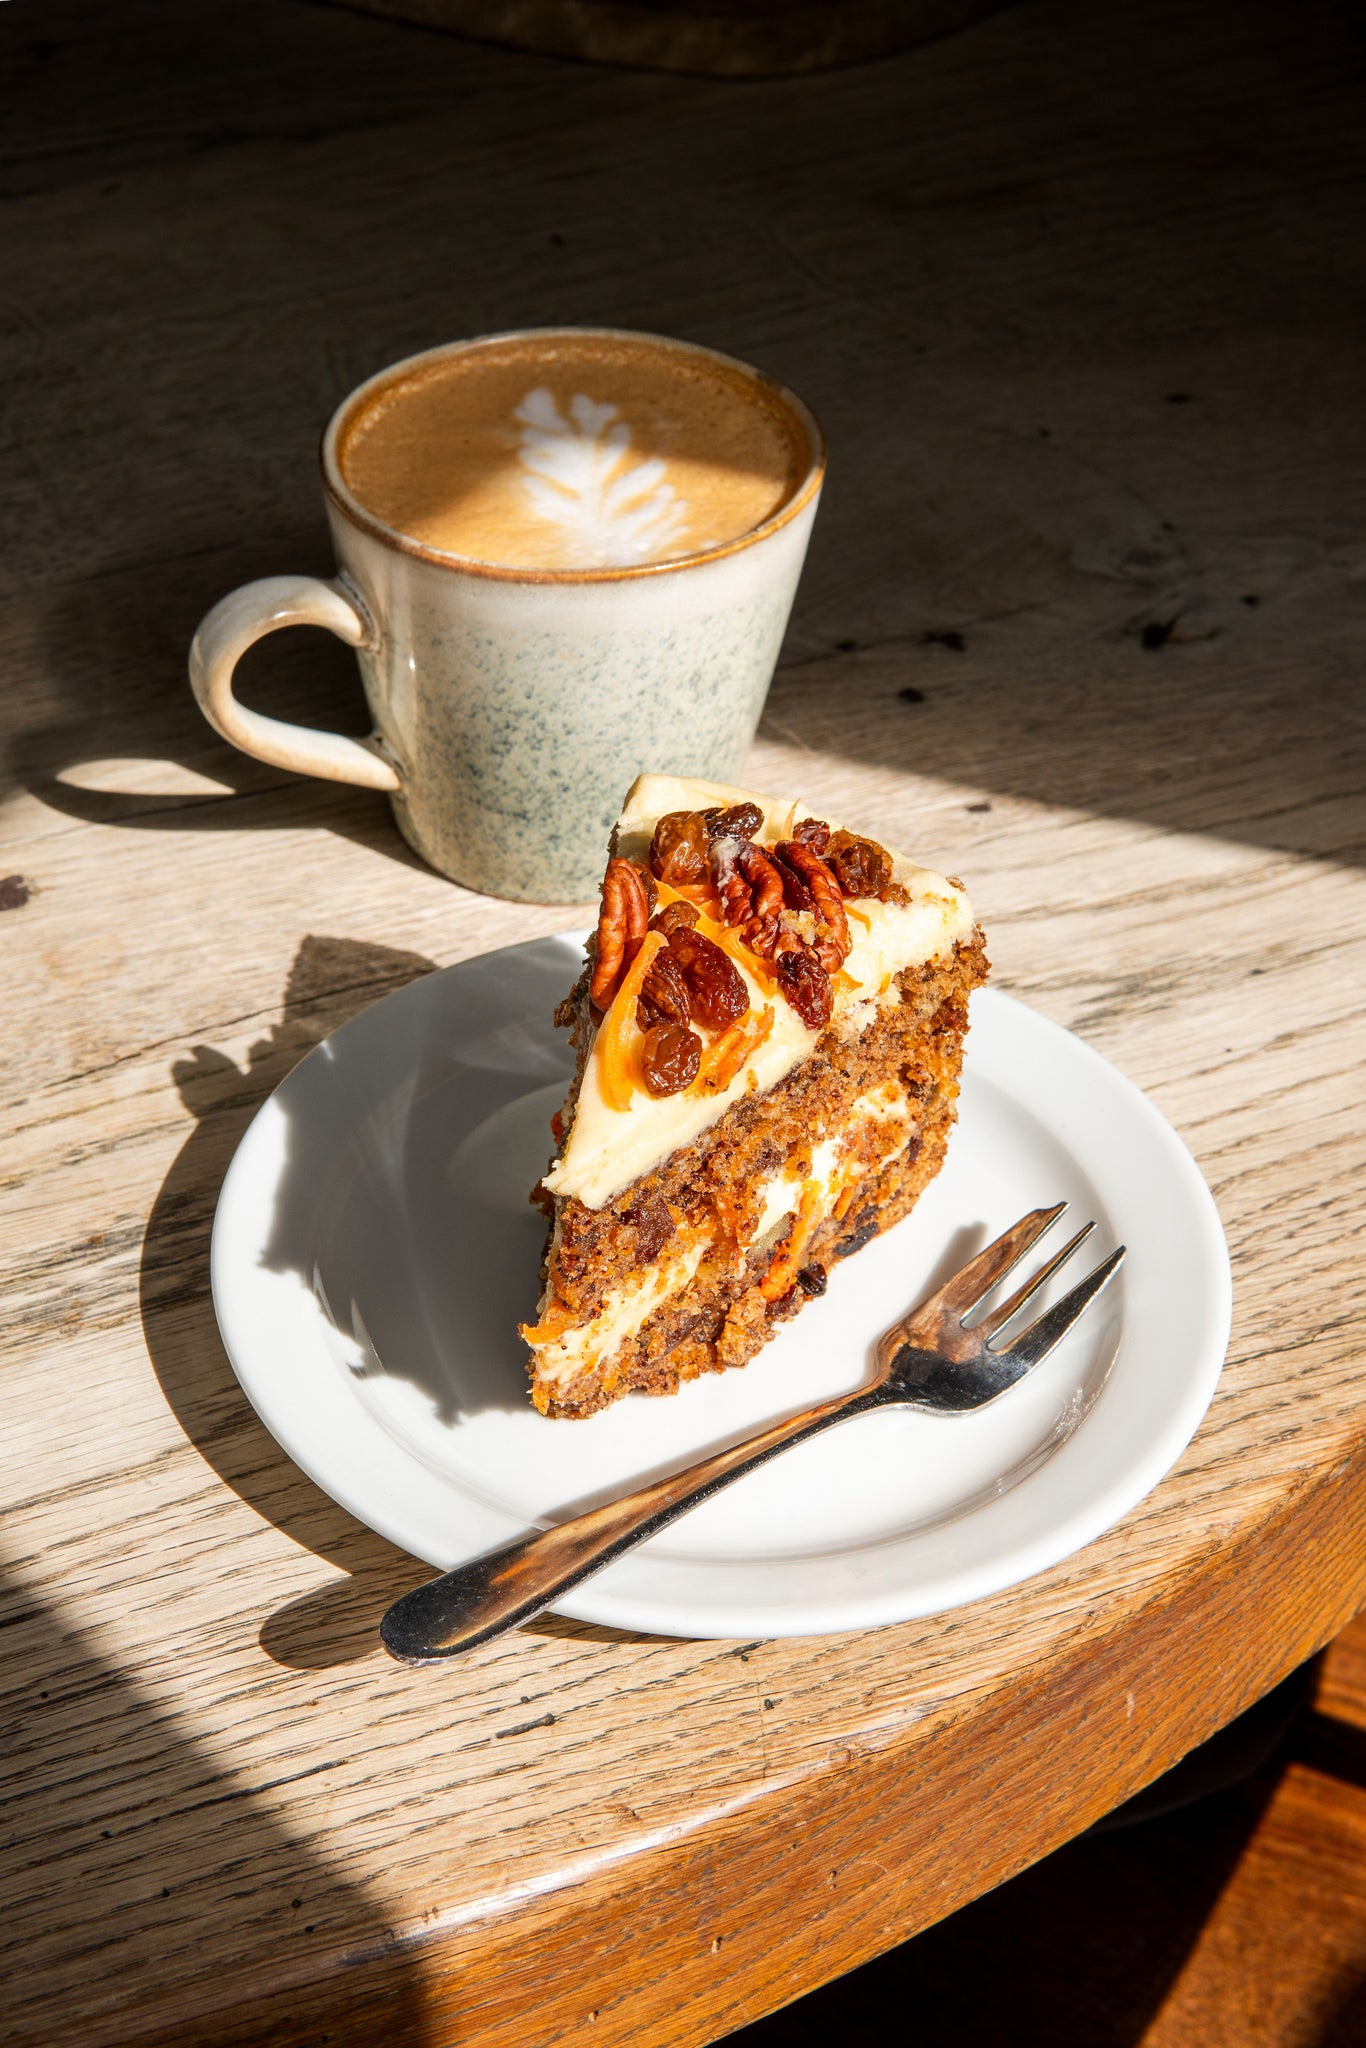 coffee and cake at friends of ham ilkley daily from 10am